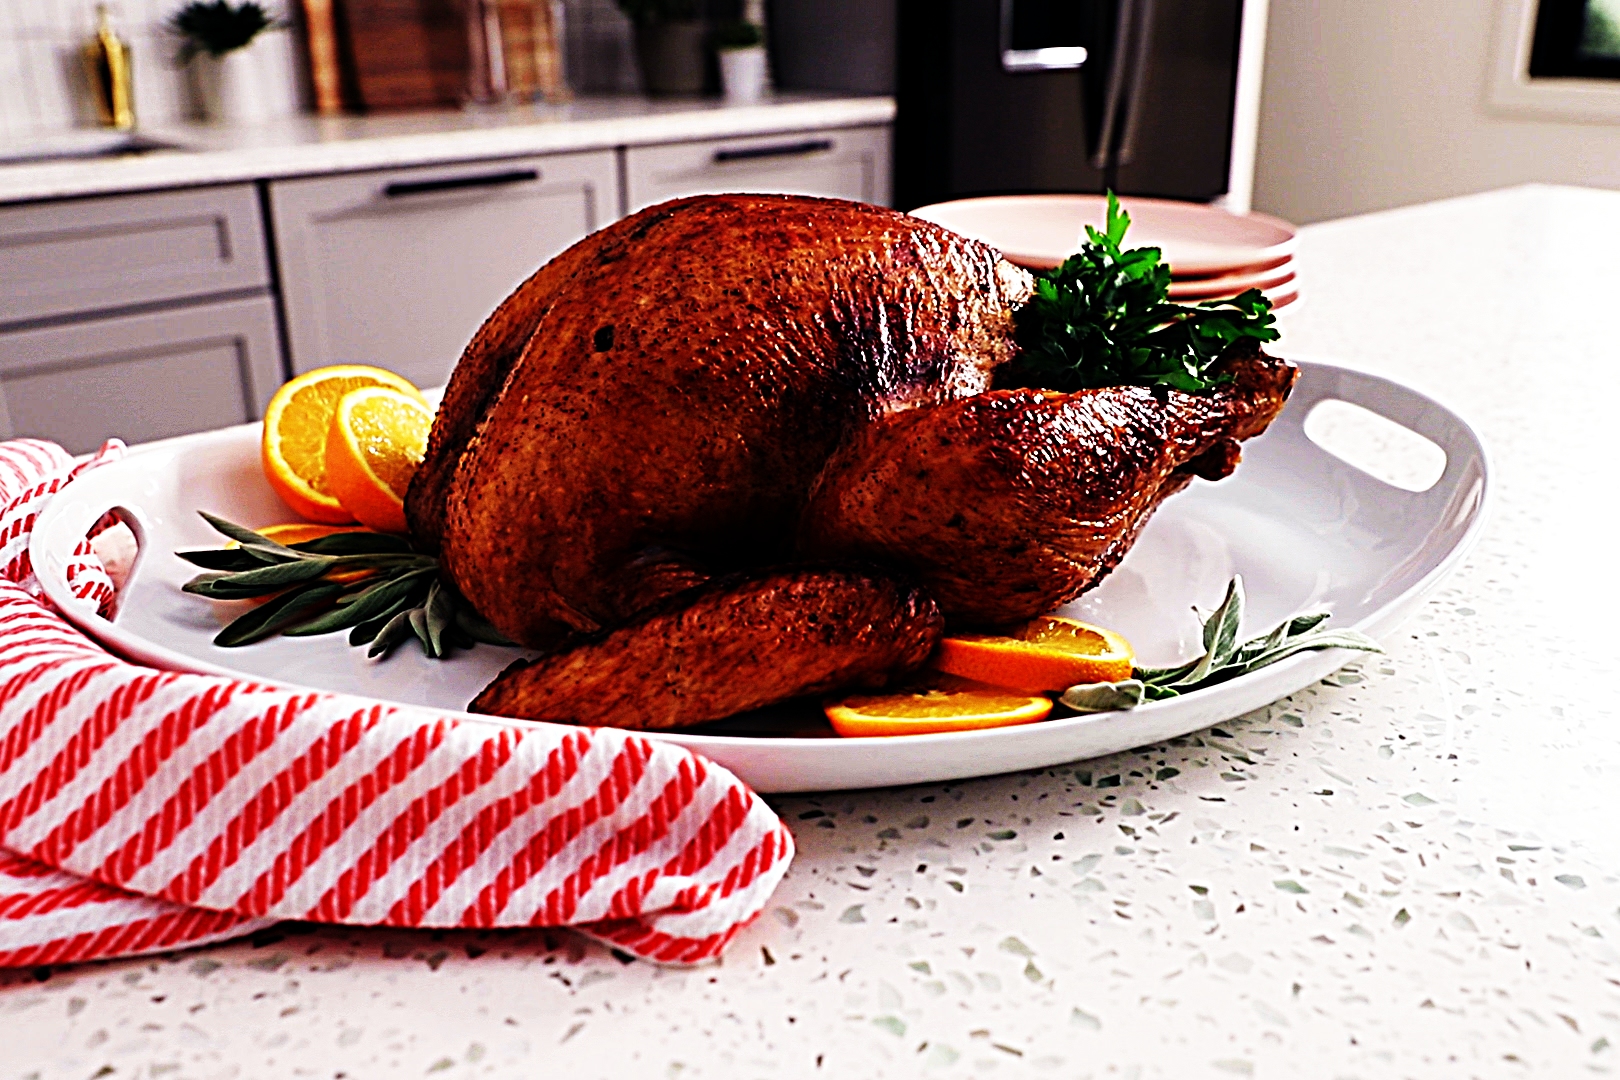 Stupid-Easy Recipe for Quick & Easy Roasted Turkey (#1 Top-Rated)